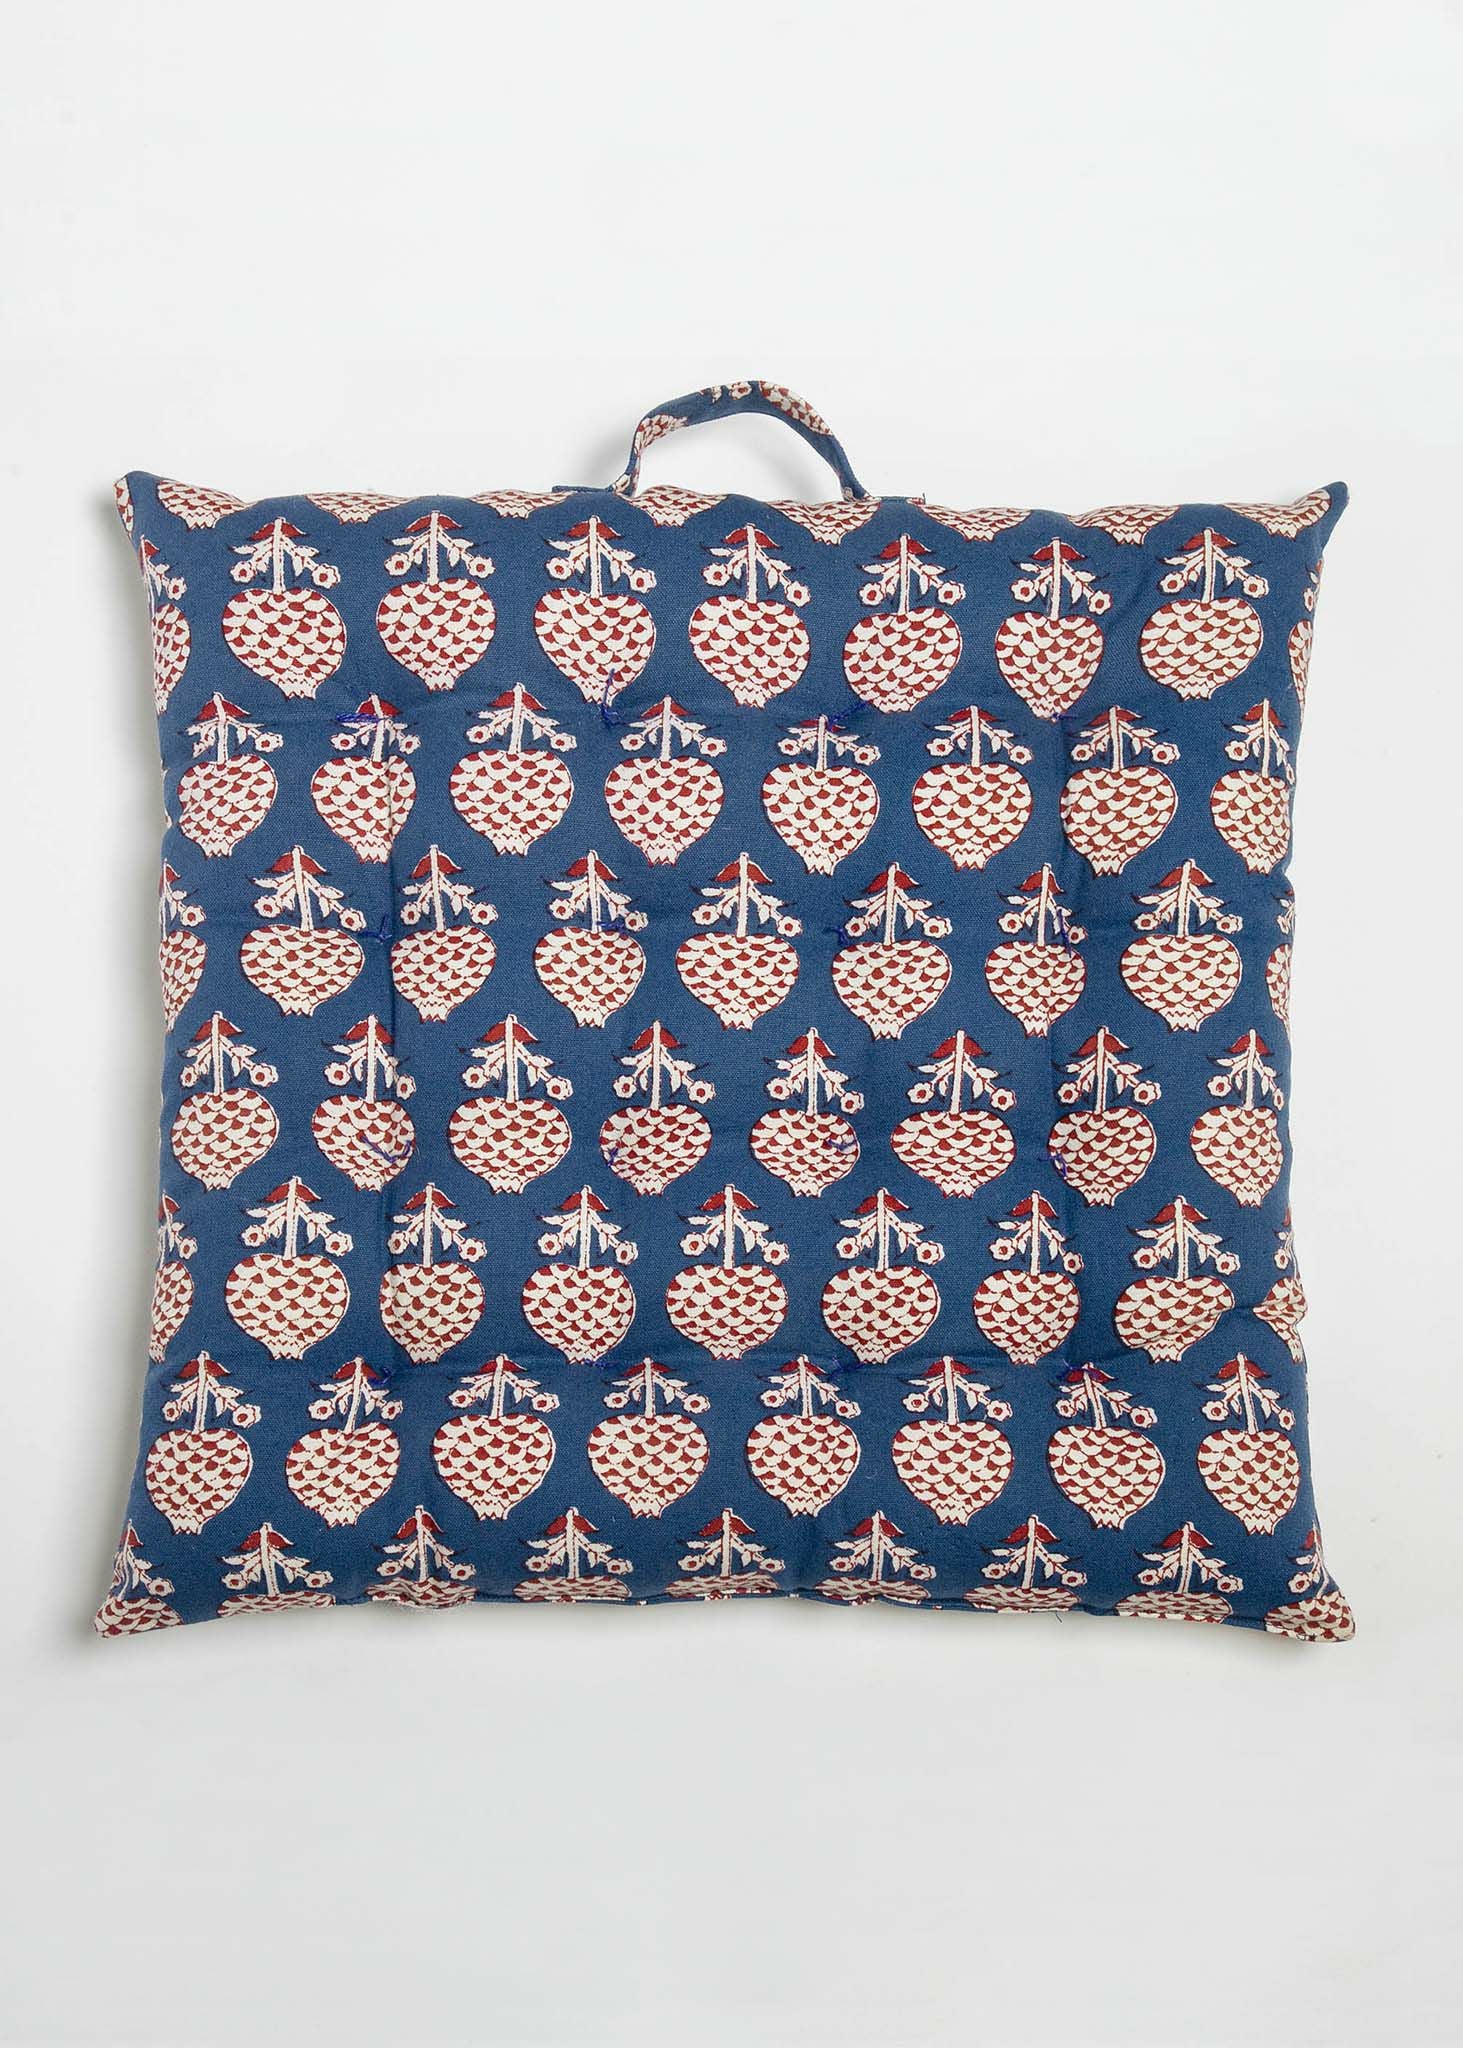 Cotton Canvas Hand Printed Seat Cushion With Handle